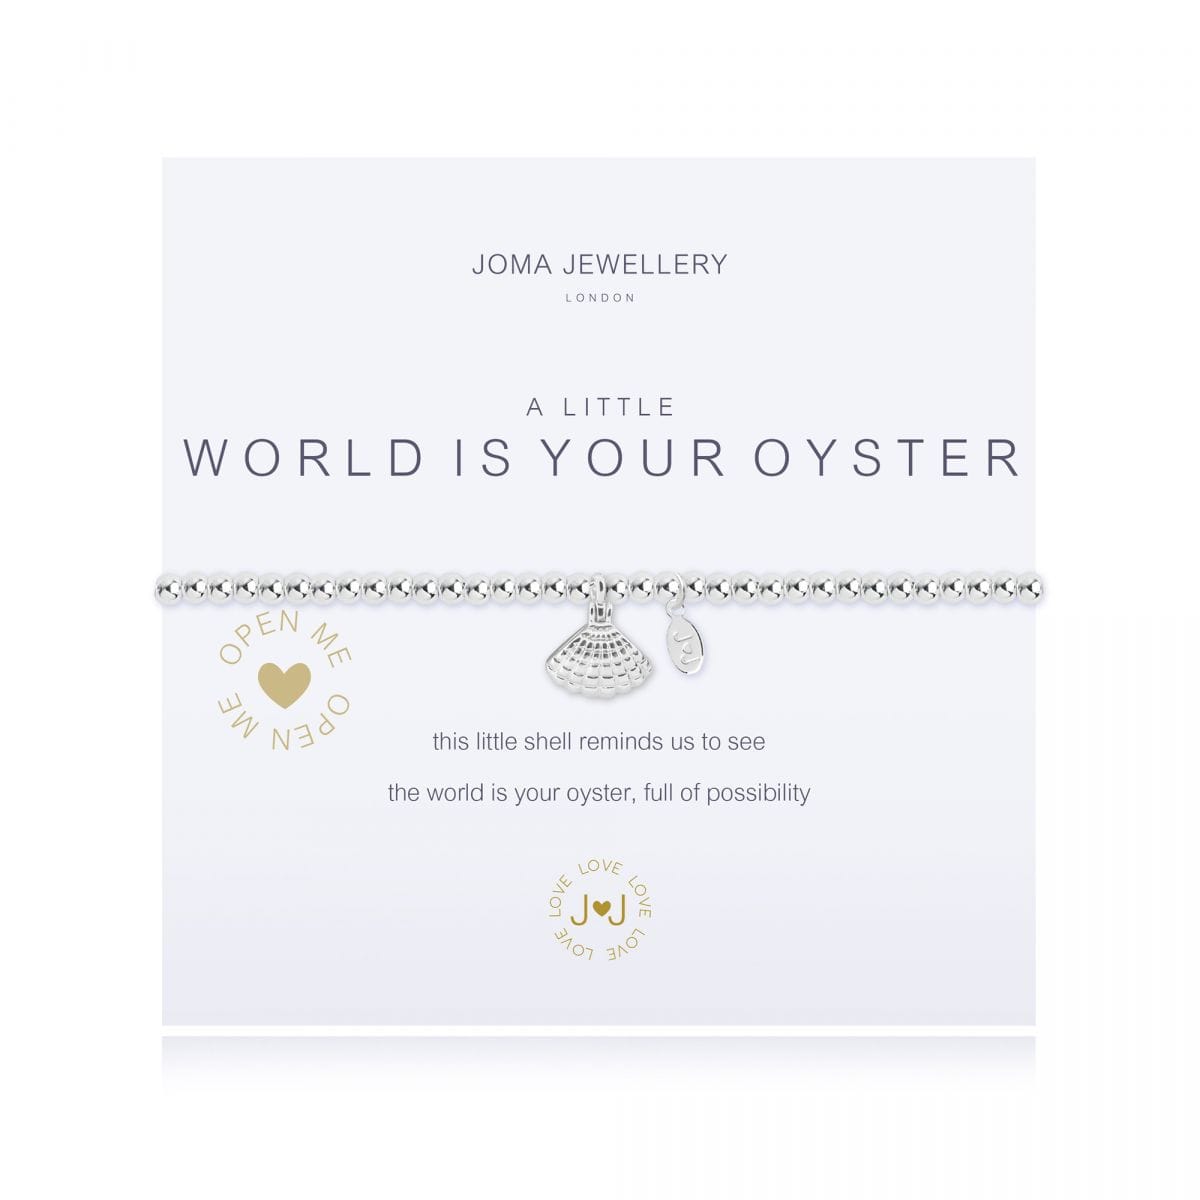 Joma Jewellery Bracelet Joma Jewellery Bracelet - A Little World is Your Oyster